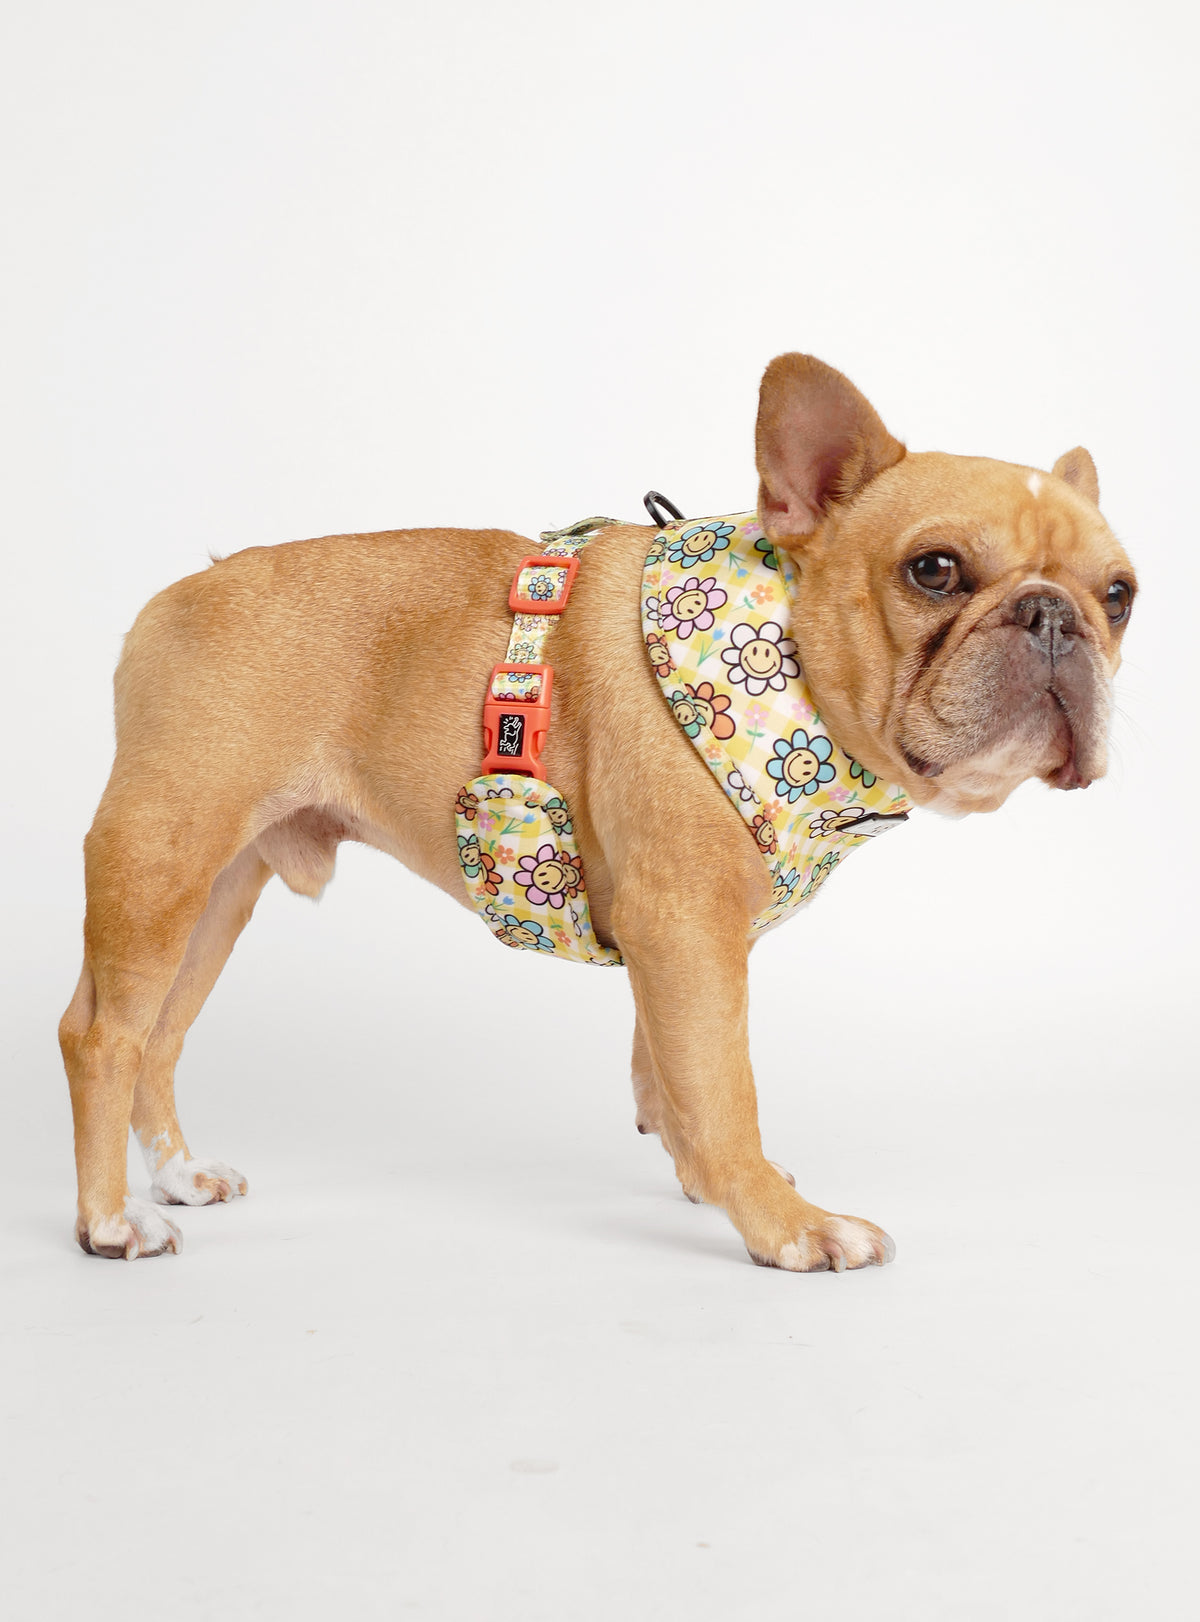 The Mushroom Party Reversible Harness